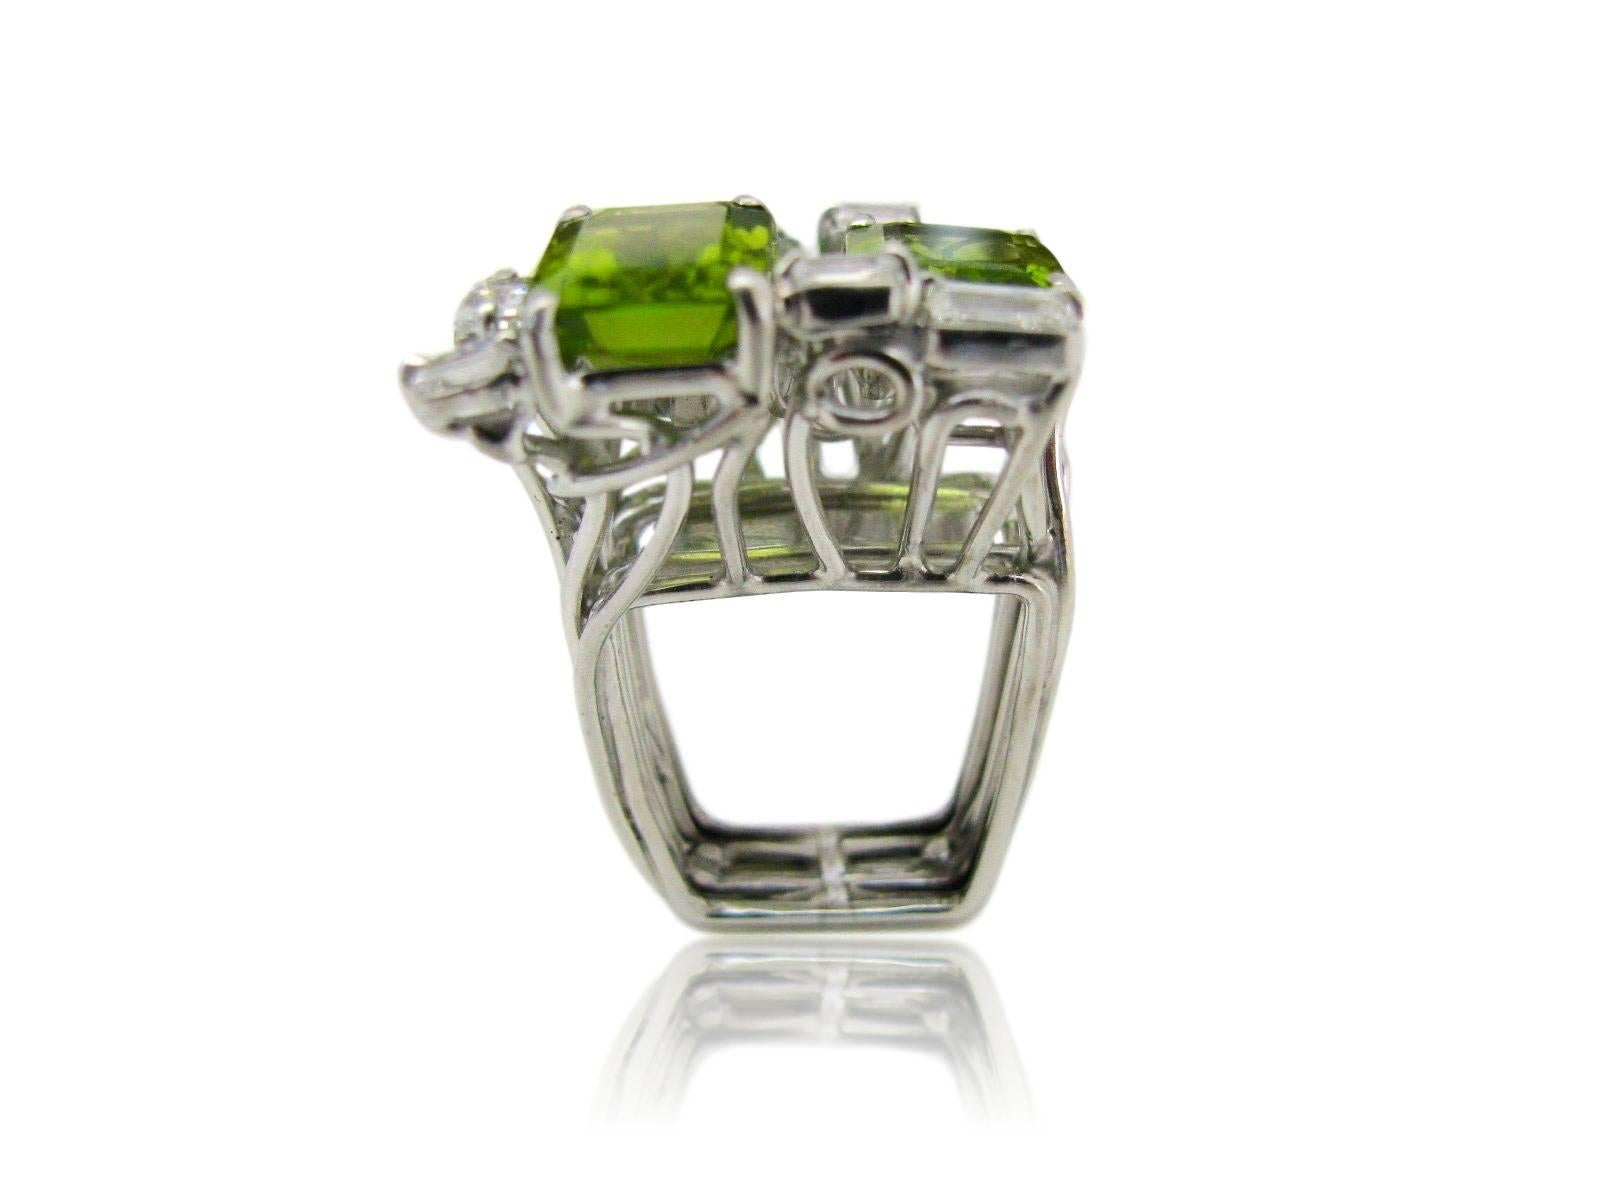 Peridot ring by Barbara Anton. The Platinum mount with a square shank supporting three emerald cut bright apple-green peridot enhanced with numerous white mixed cut diamonds. This one of a kind jewel is designed by Barbara Anton, a Jacqueline of